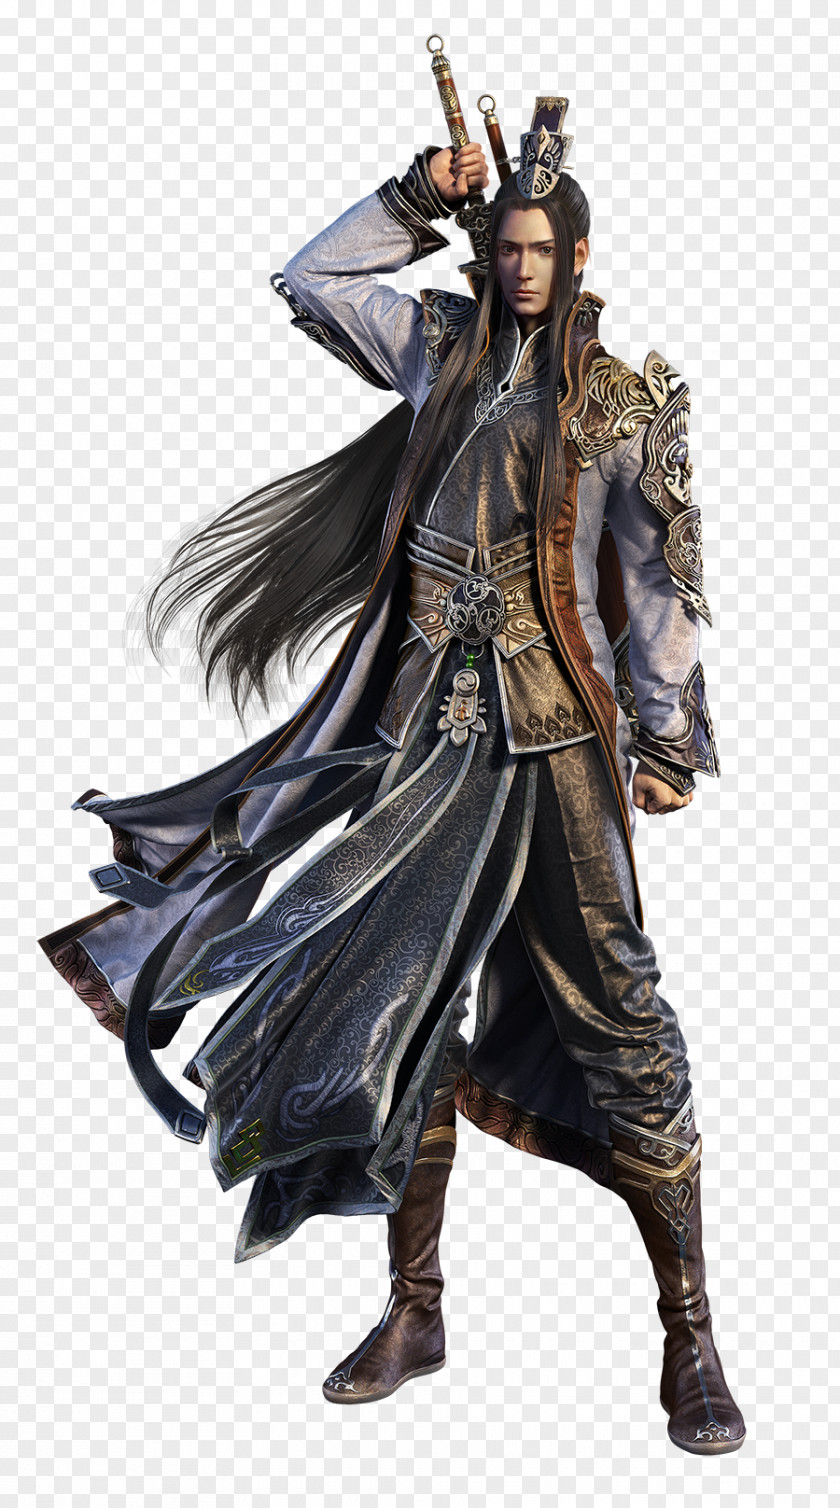 OL Moonlight Blade 門派 Tencent Game Wuxia PNG